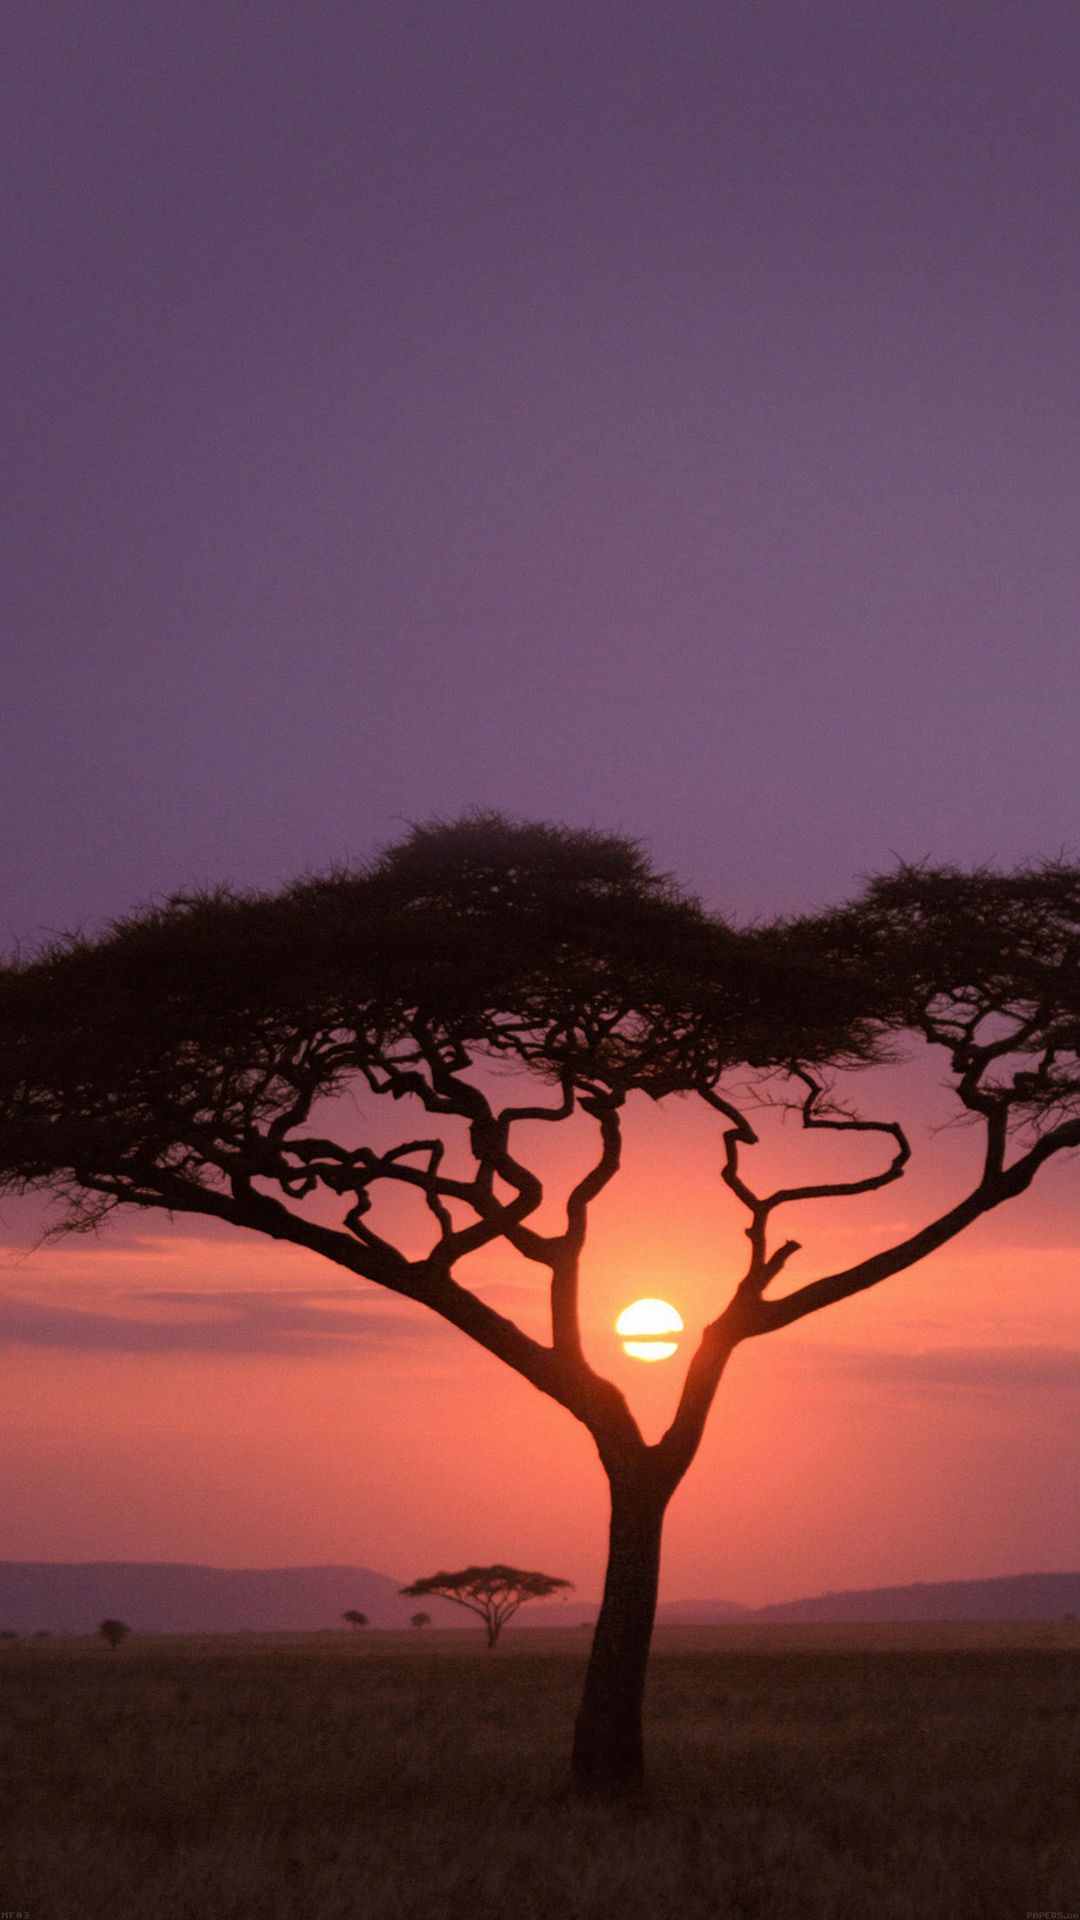 African Tree In Sunset - HD Wallpaper 